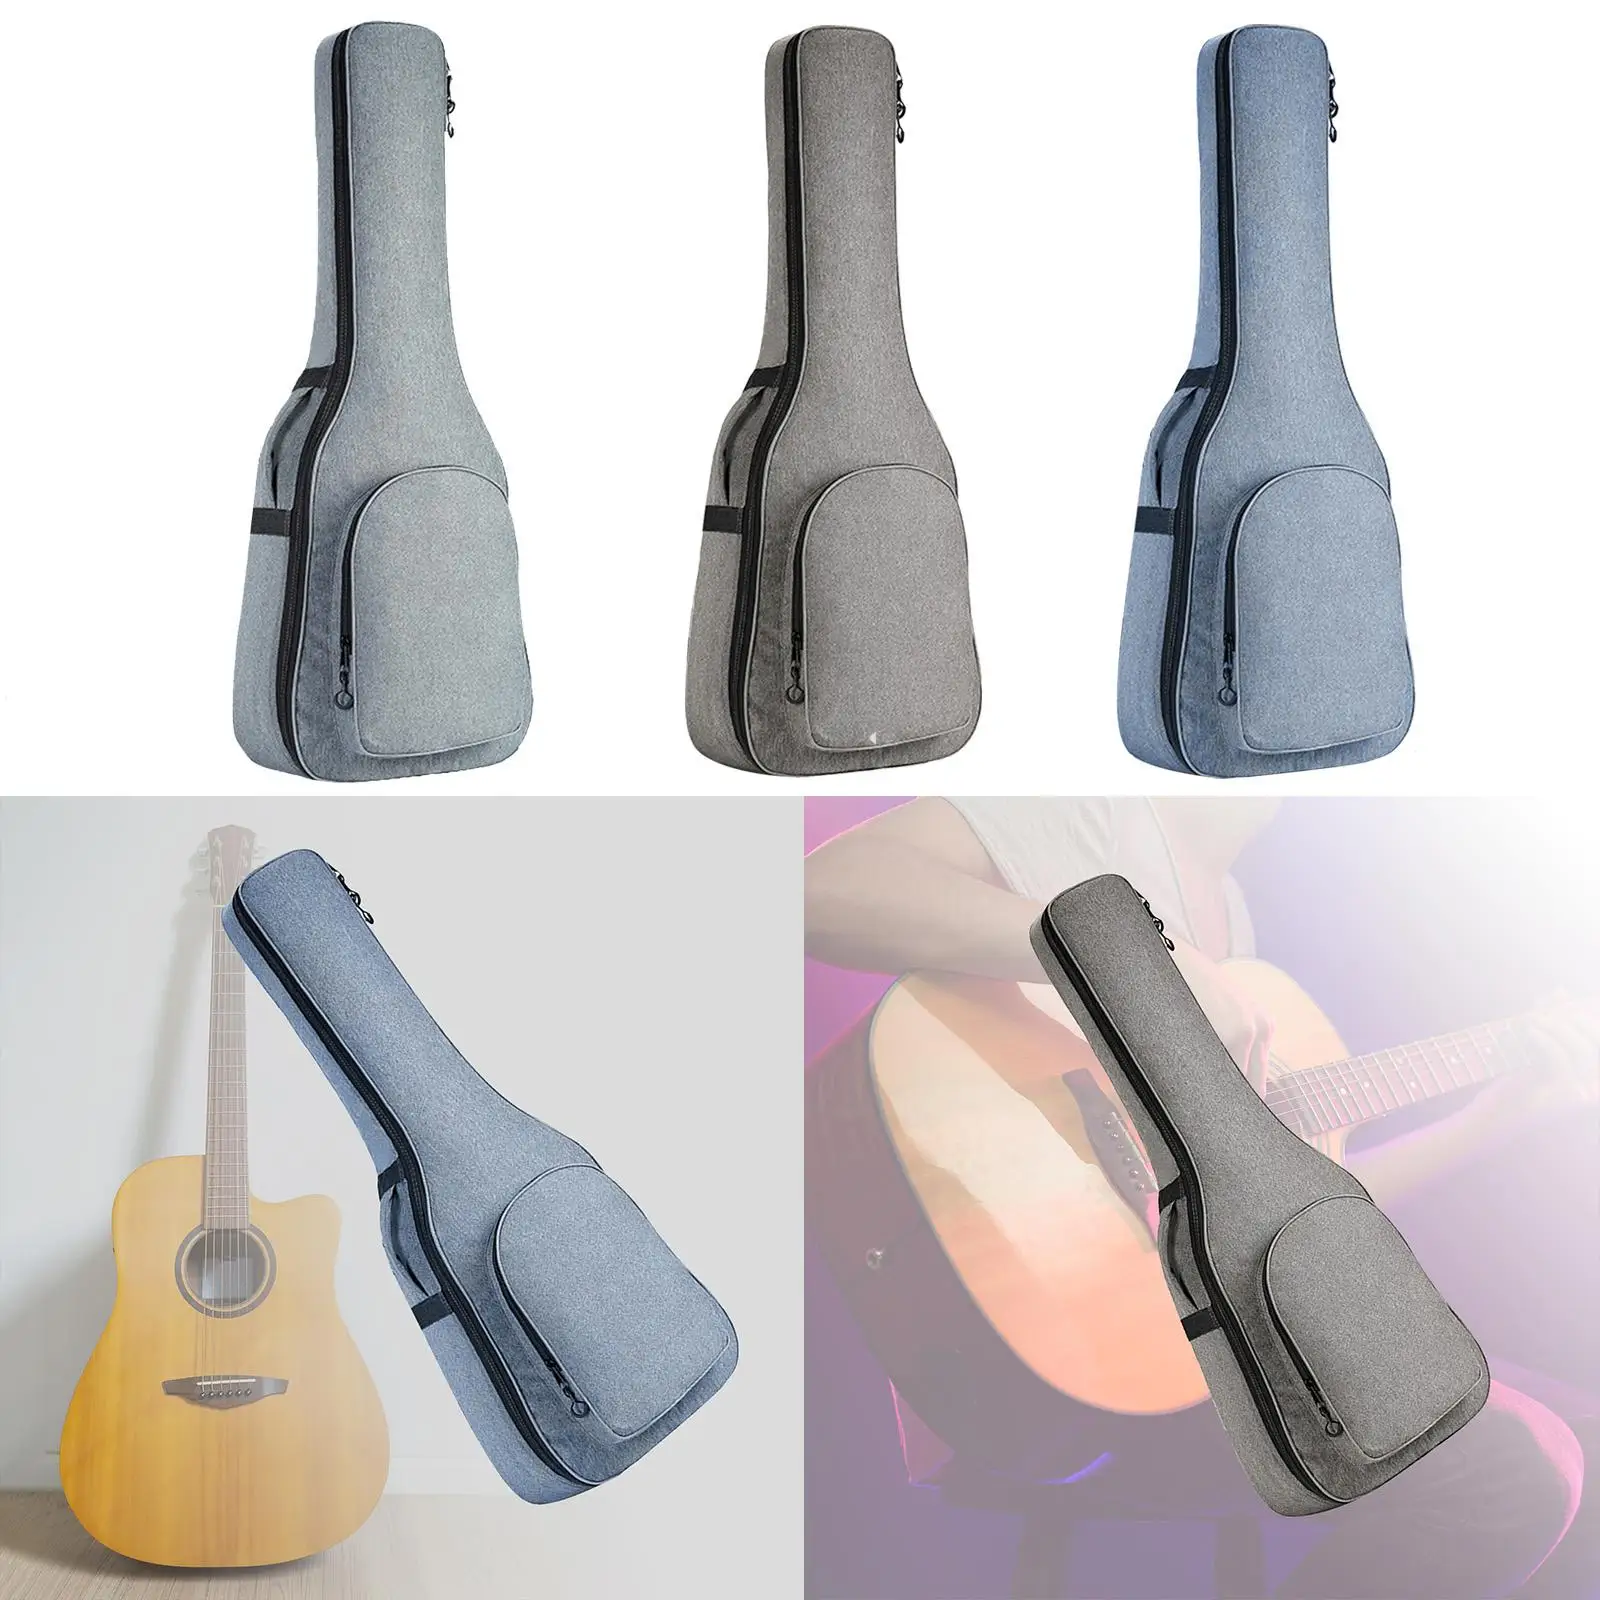 41 inch Guitar Case Heavy Duty Durable Bag Holder Extra Thicker for Guitar Accessories